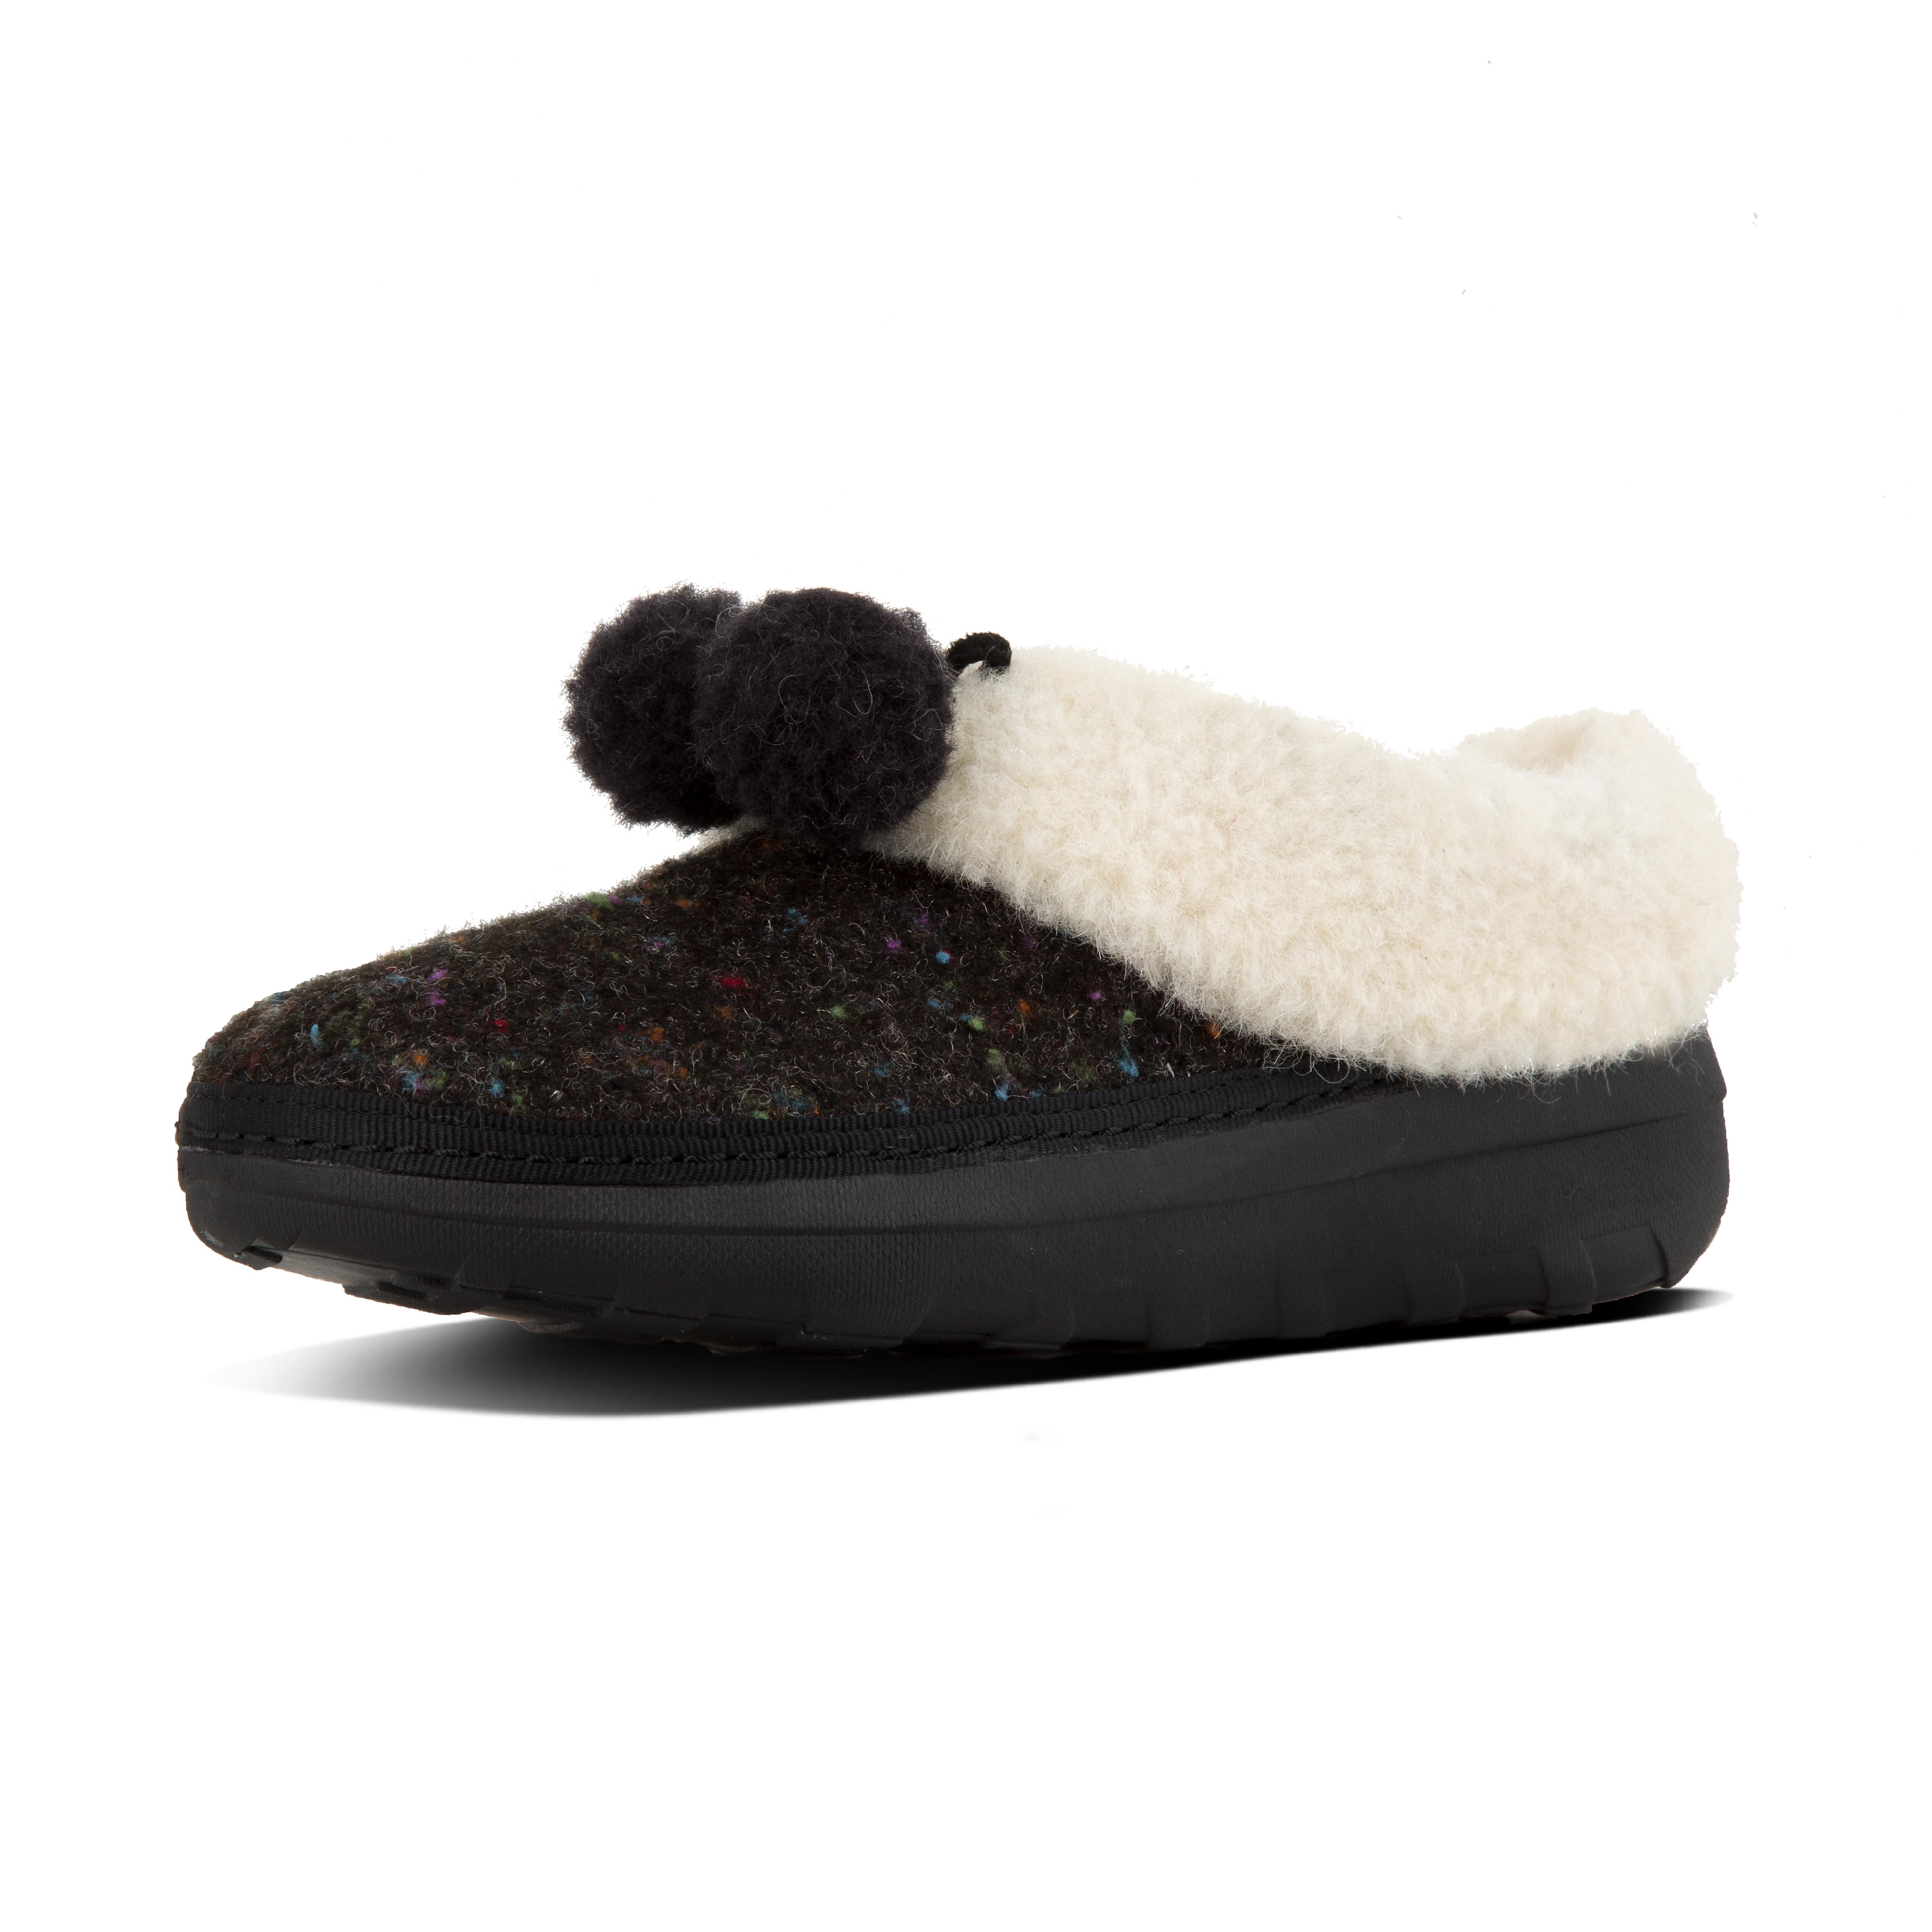 fitflop loaff slippers